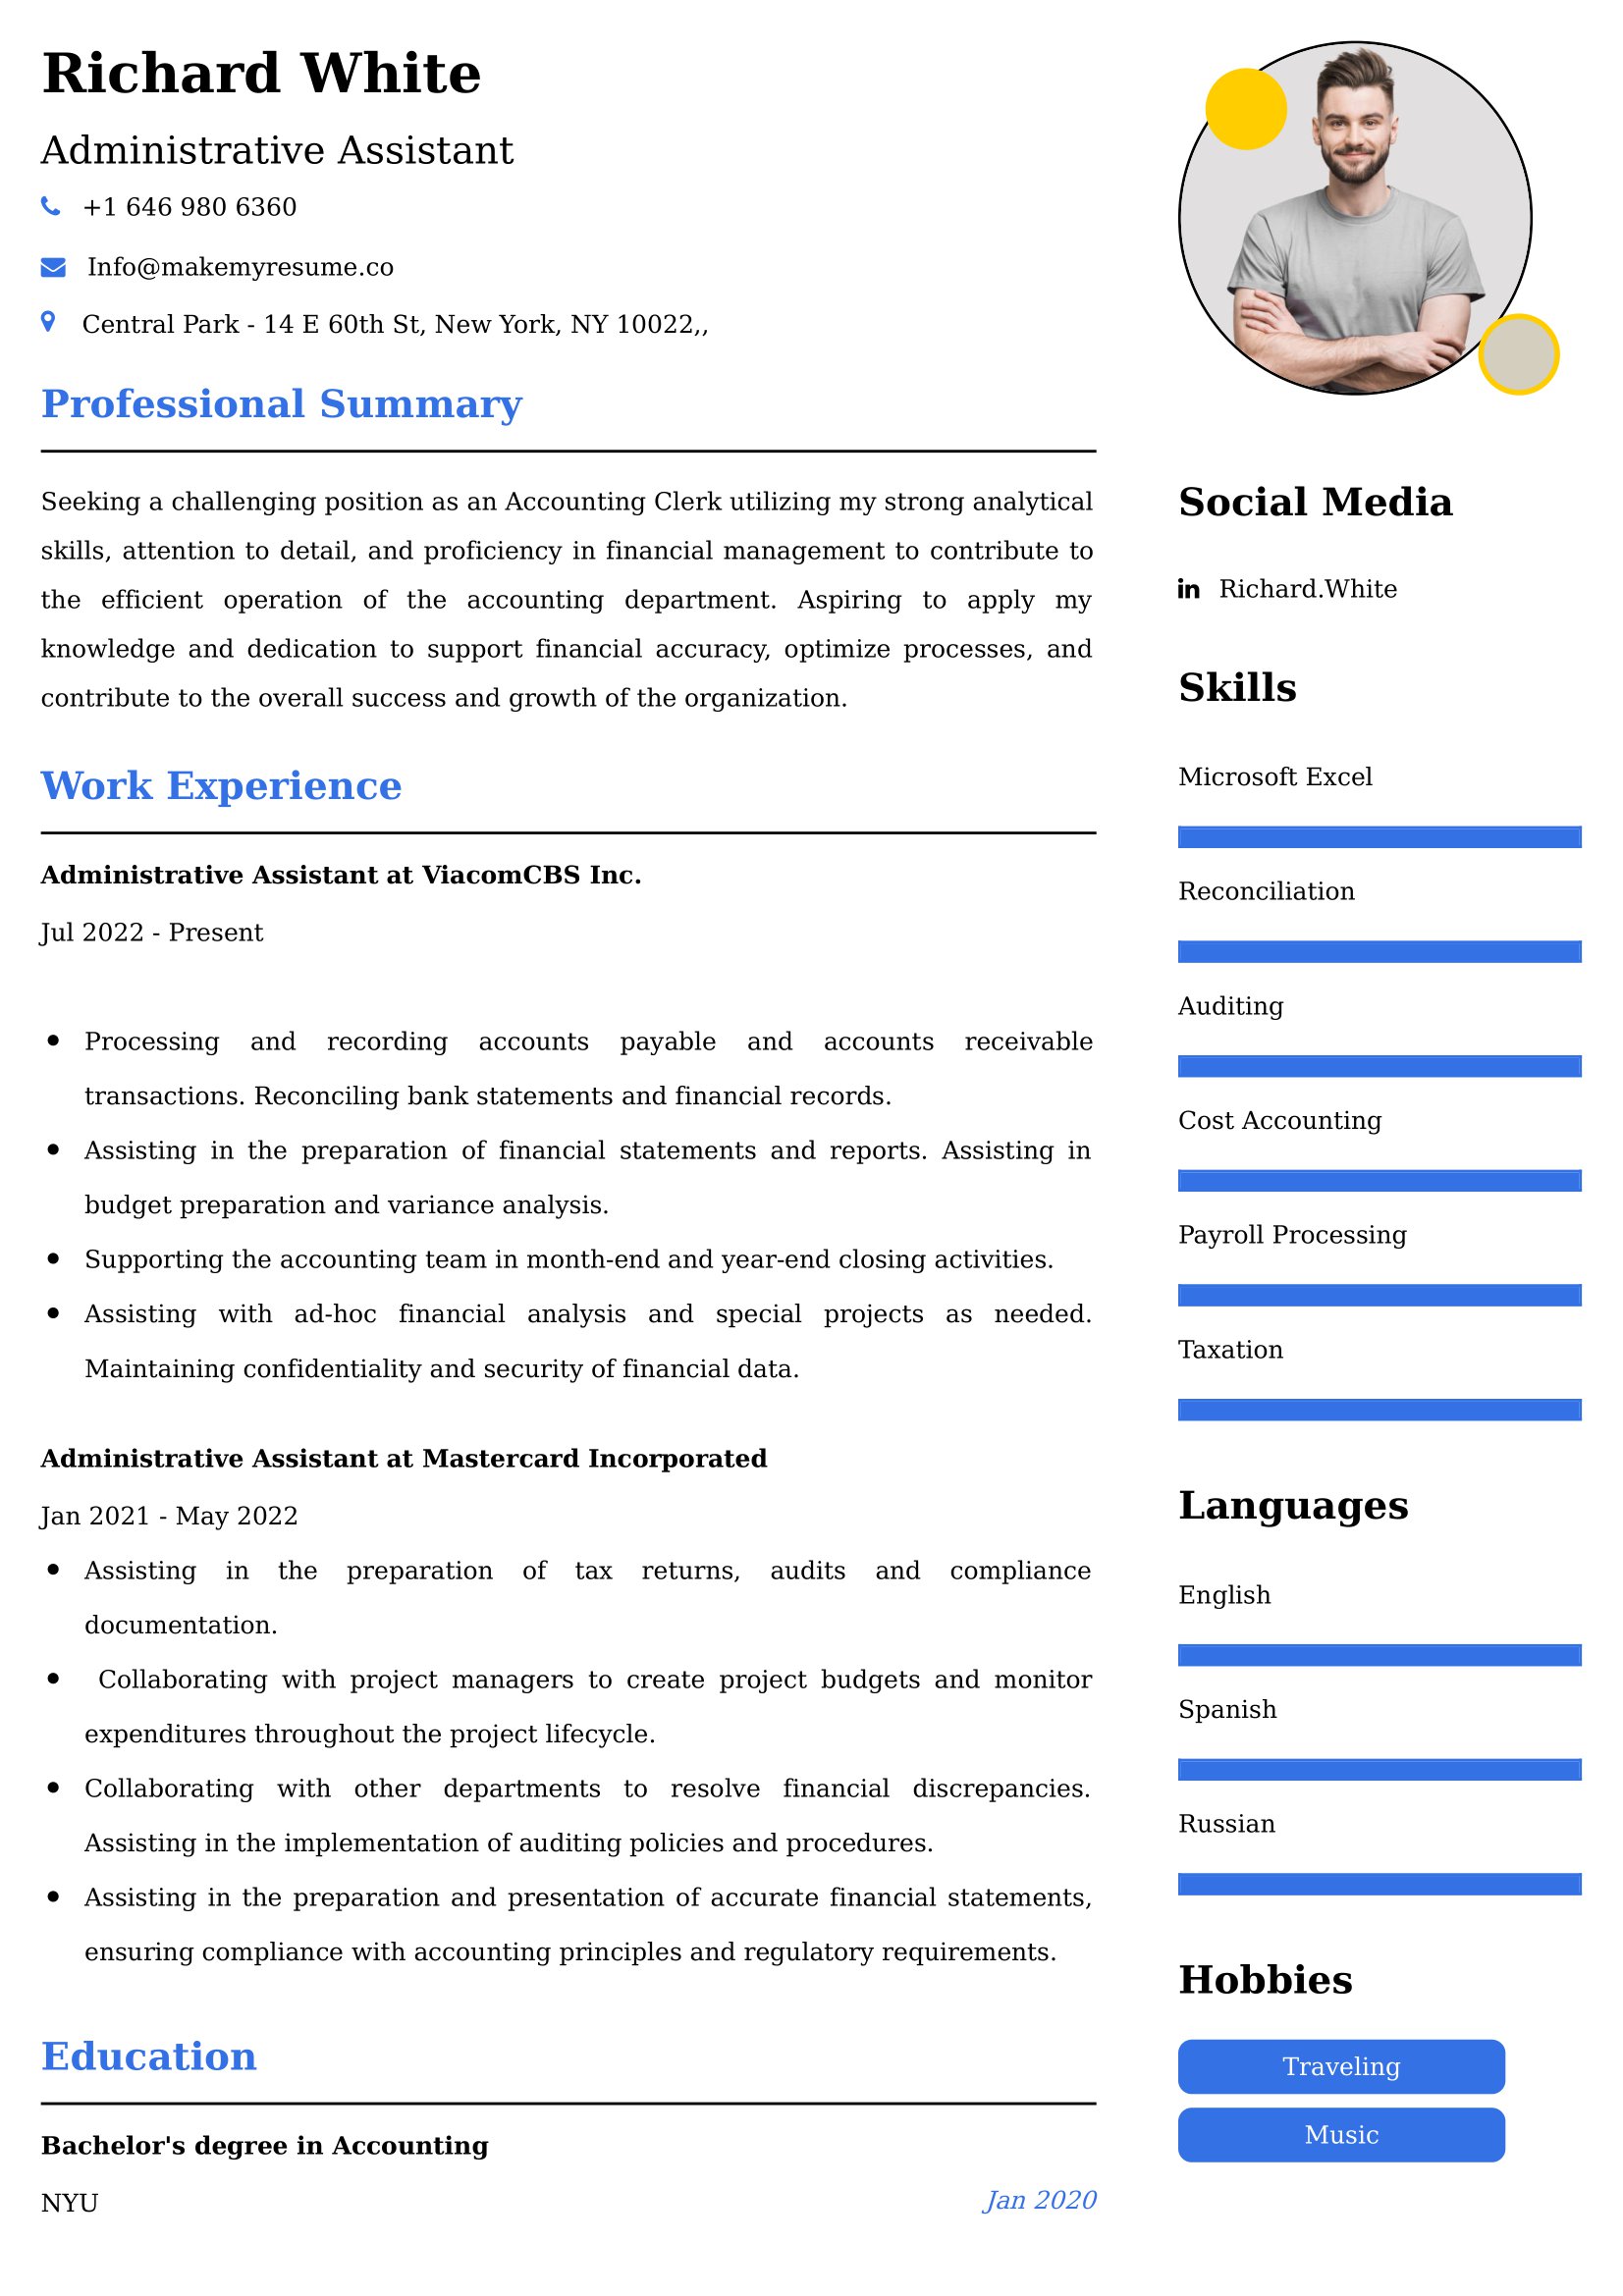 Administrative Assistant Resume Examples Canada